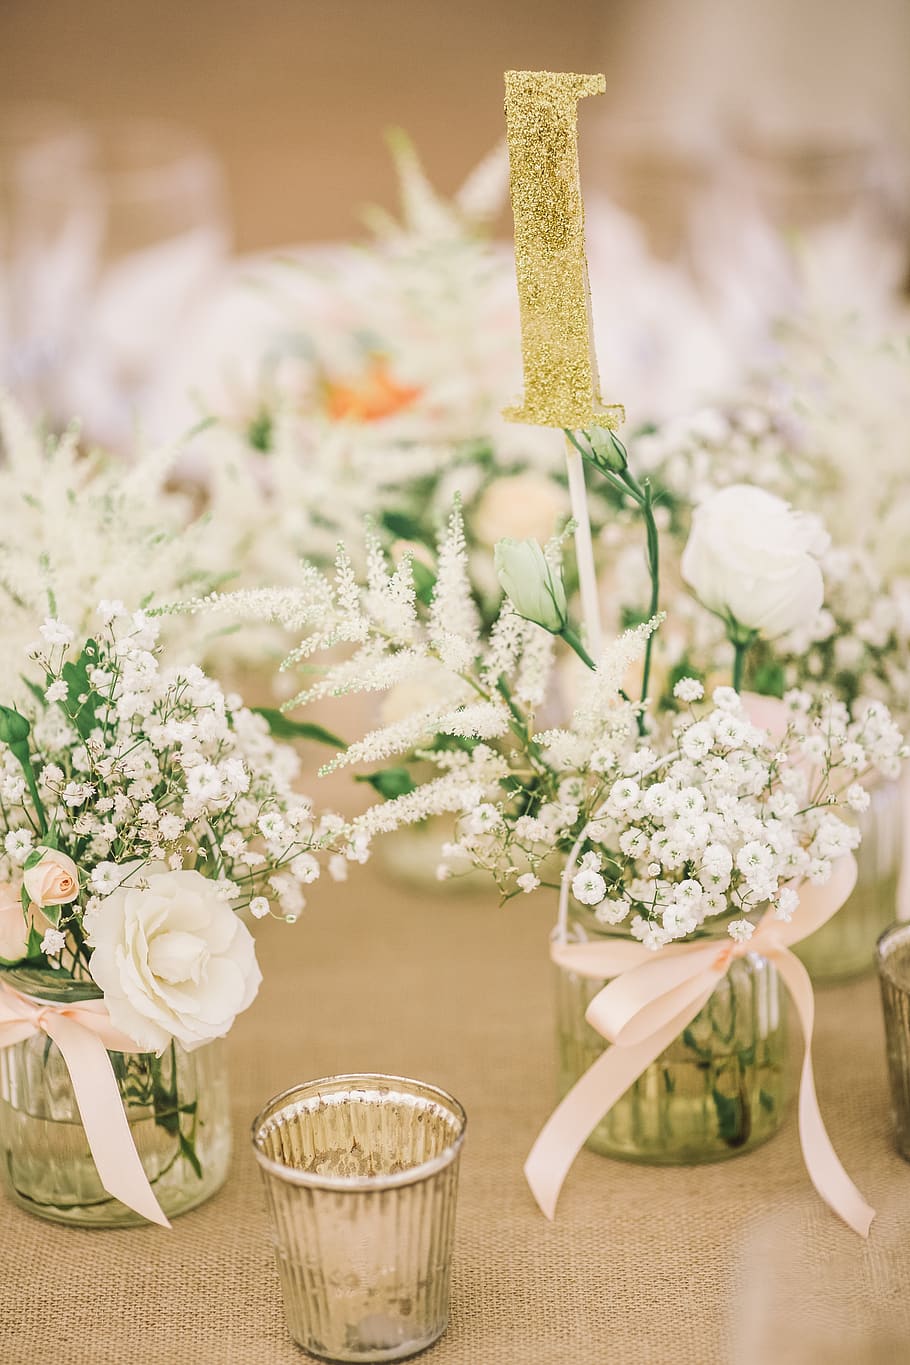 flowers, wedding flowers, bouquet, white, flowering plant, flower, freshness, plant, table, food and drink